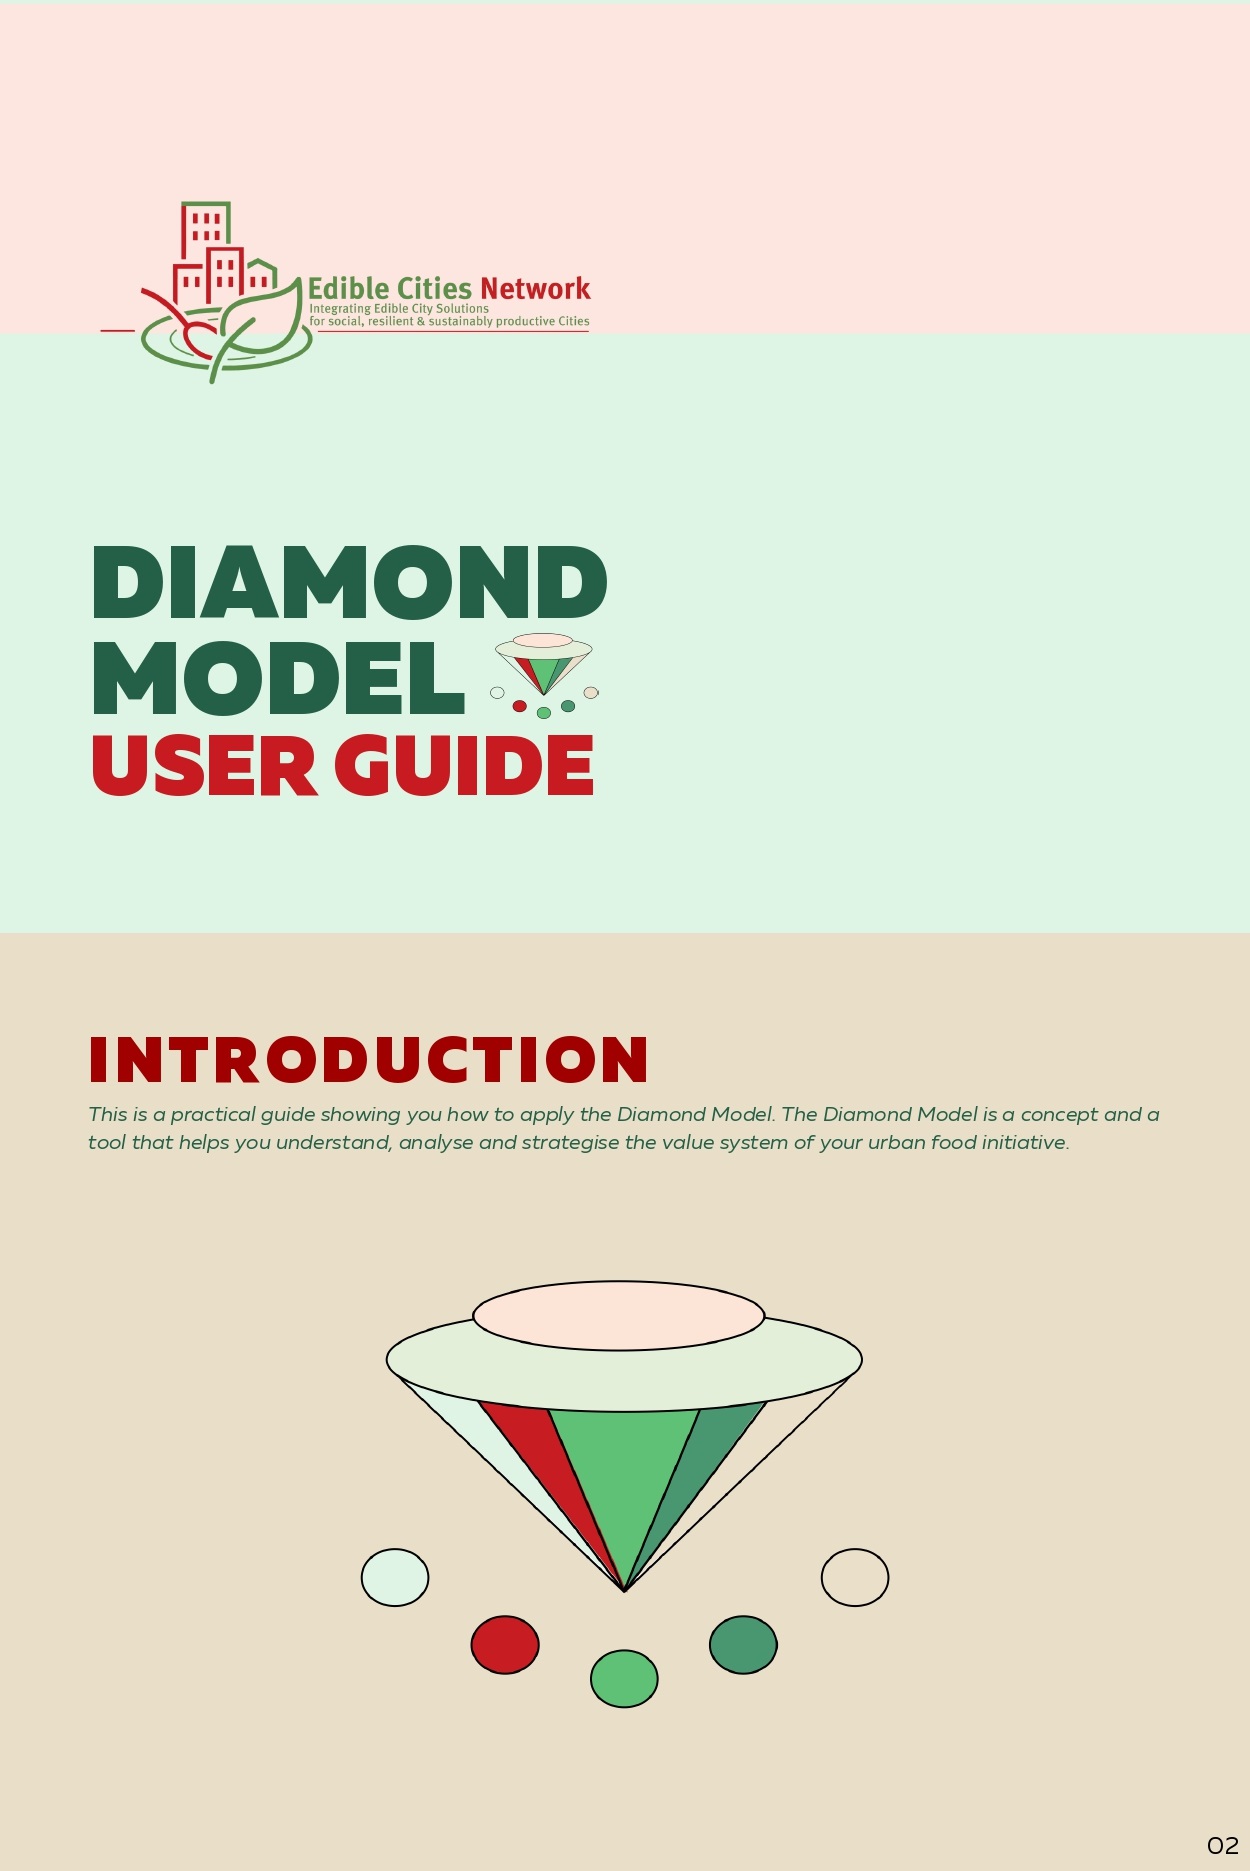 Diamond model user guide for evaluating urban food initiatives